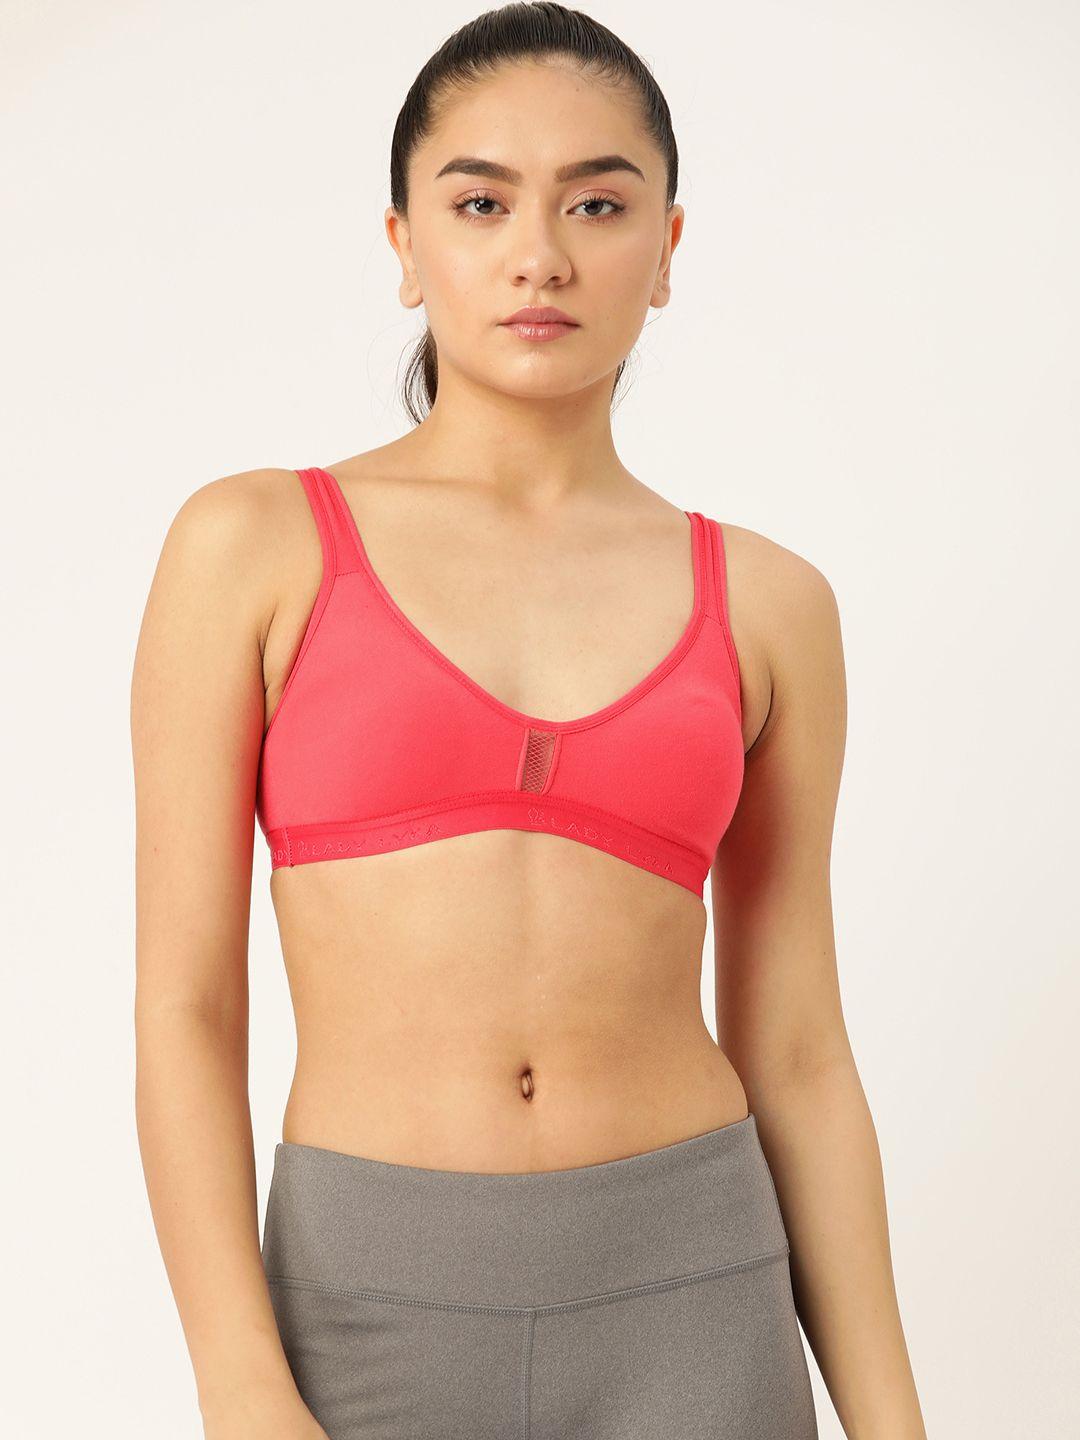 lady-lyka-coral-pink-solid-cotton-workout-bra-full-coverage-non-wired-non-padded